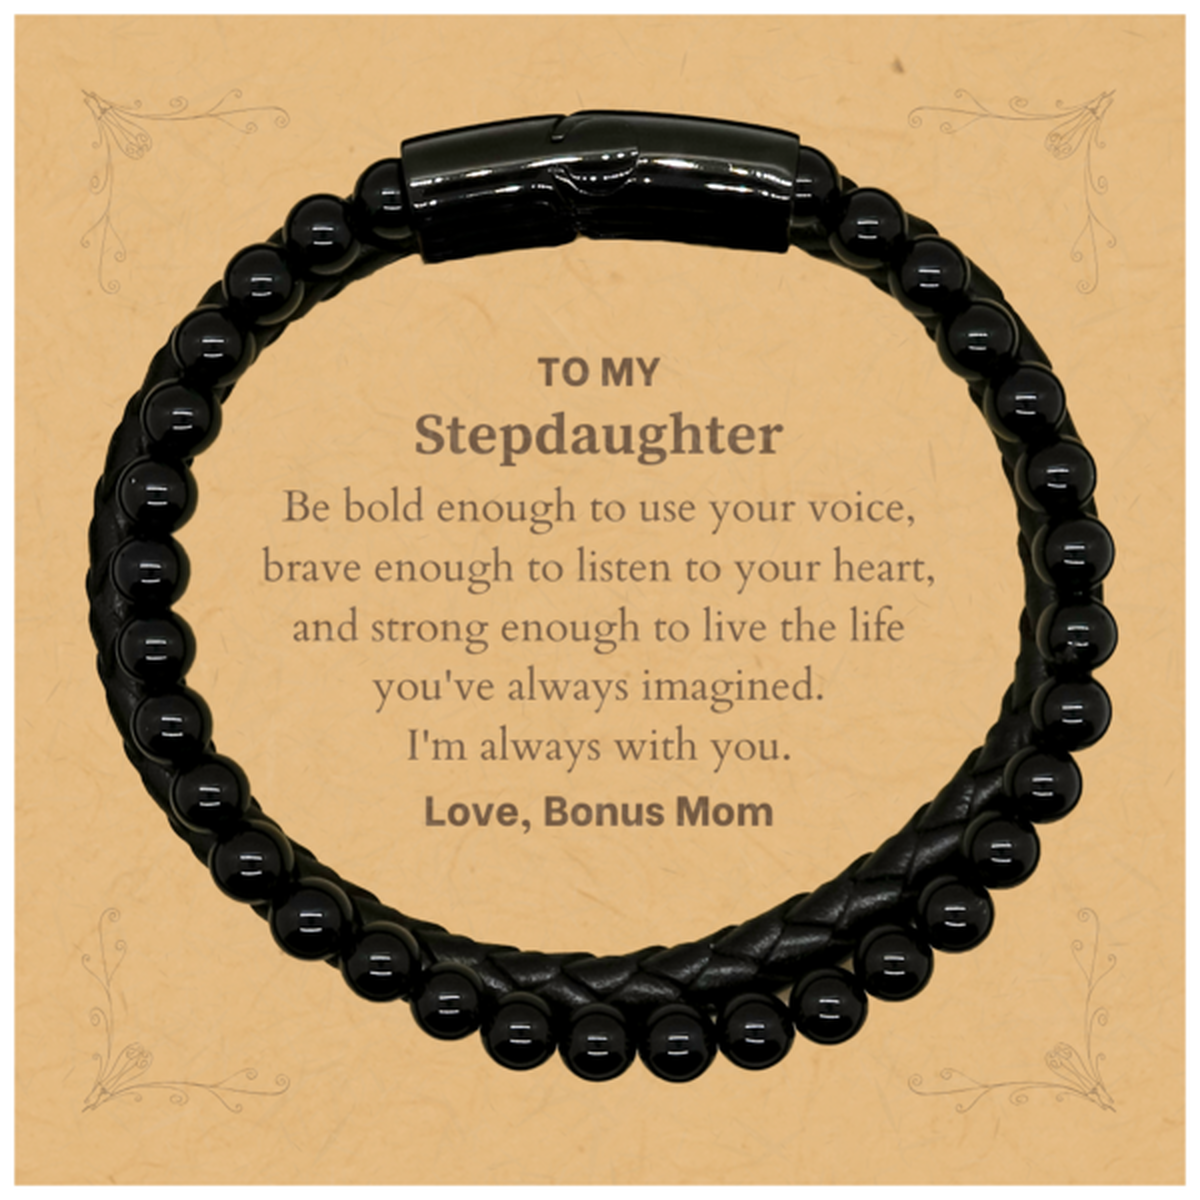 Keepsake Stepdaughter Stone Leather Bracelets Gift Idea Graduation Christmas Birthday Stepdaughter from Bonus Mom, Stepdaughter Be bold enough to use your voice, brave enough to listen to your heart. Love, Bonus Mom